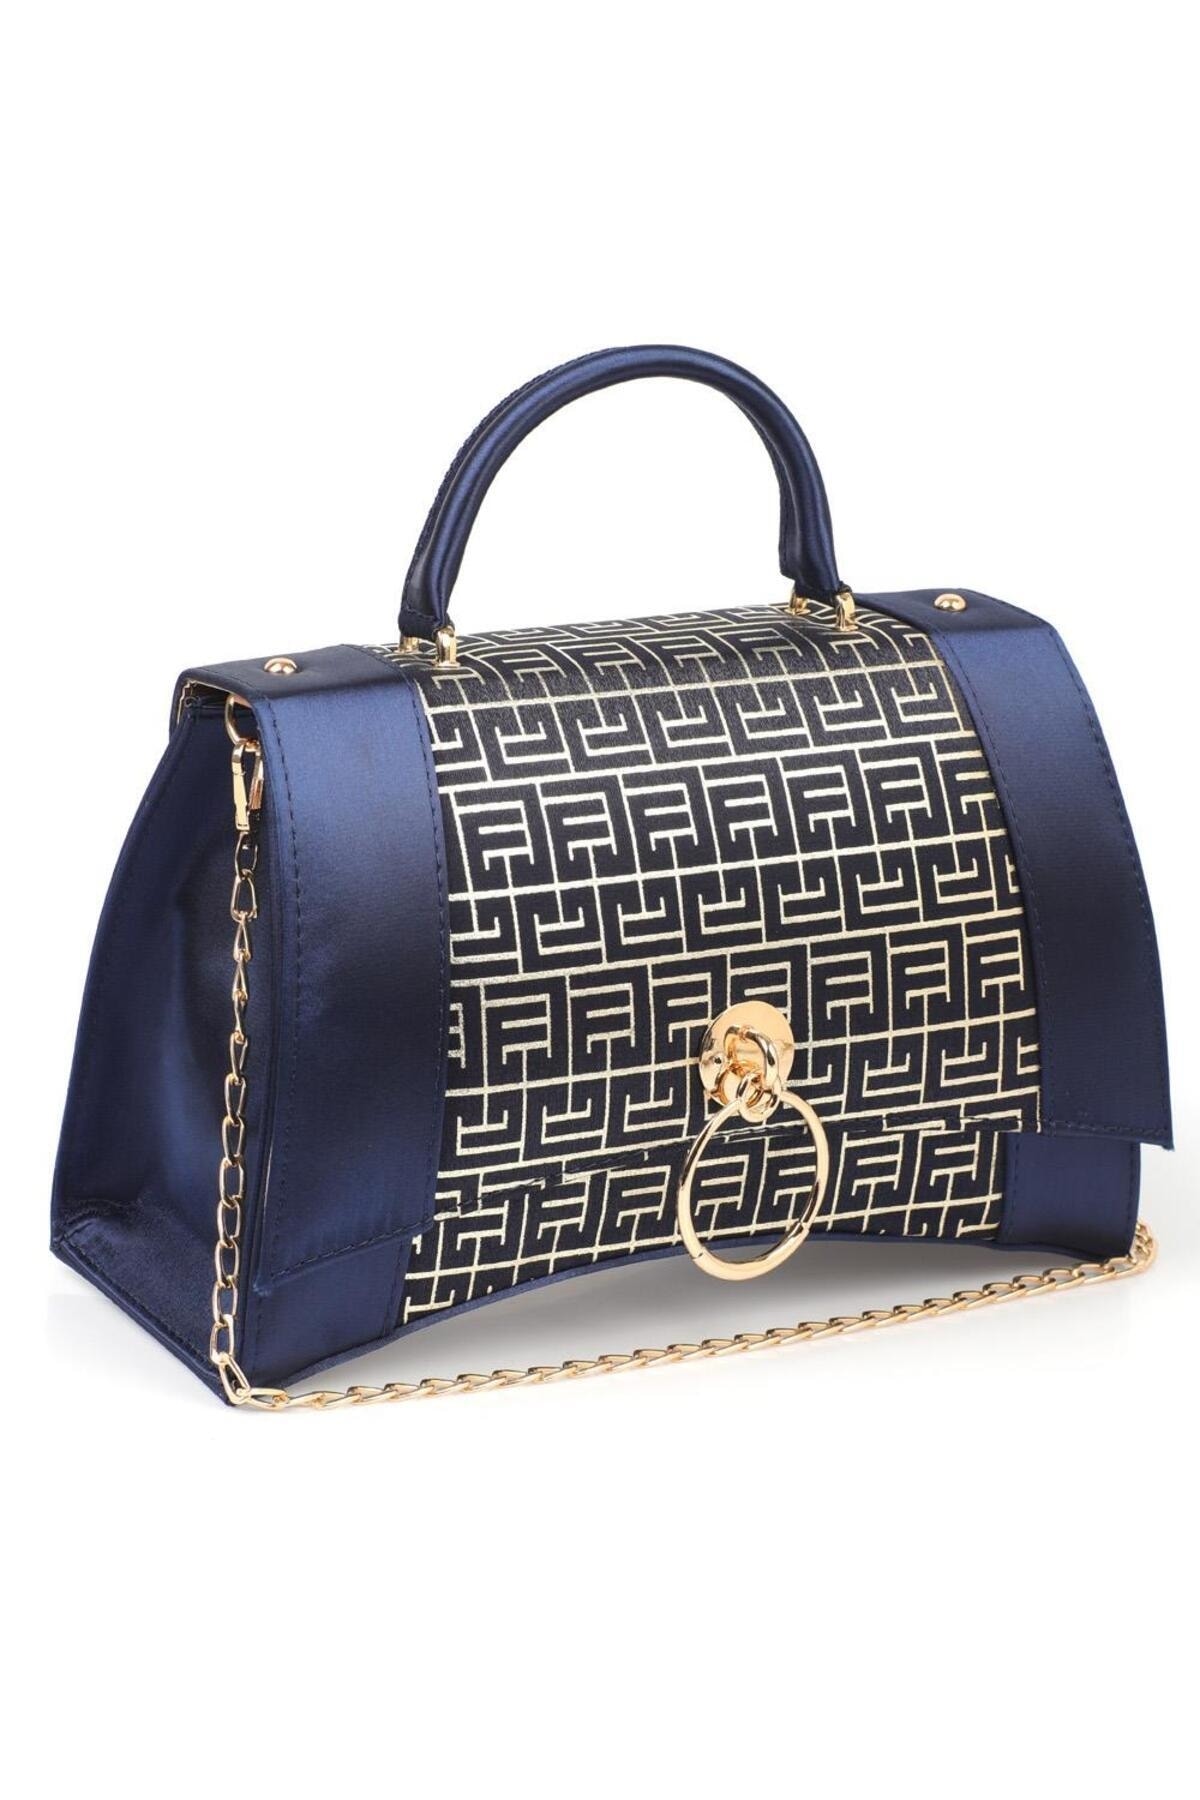 Capone Outfitters Capone Solo Women's Navy Blue Bag